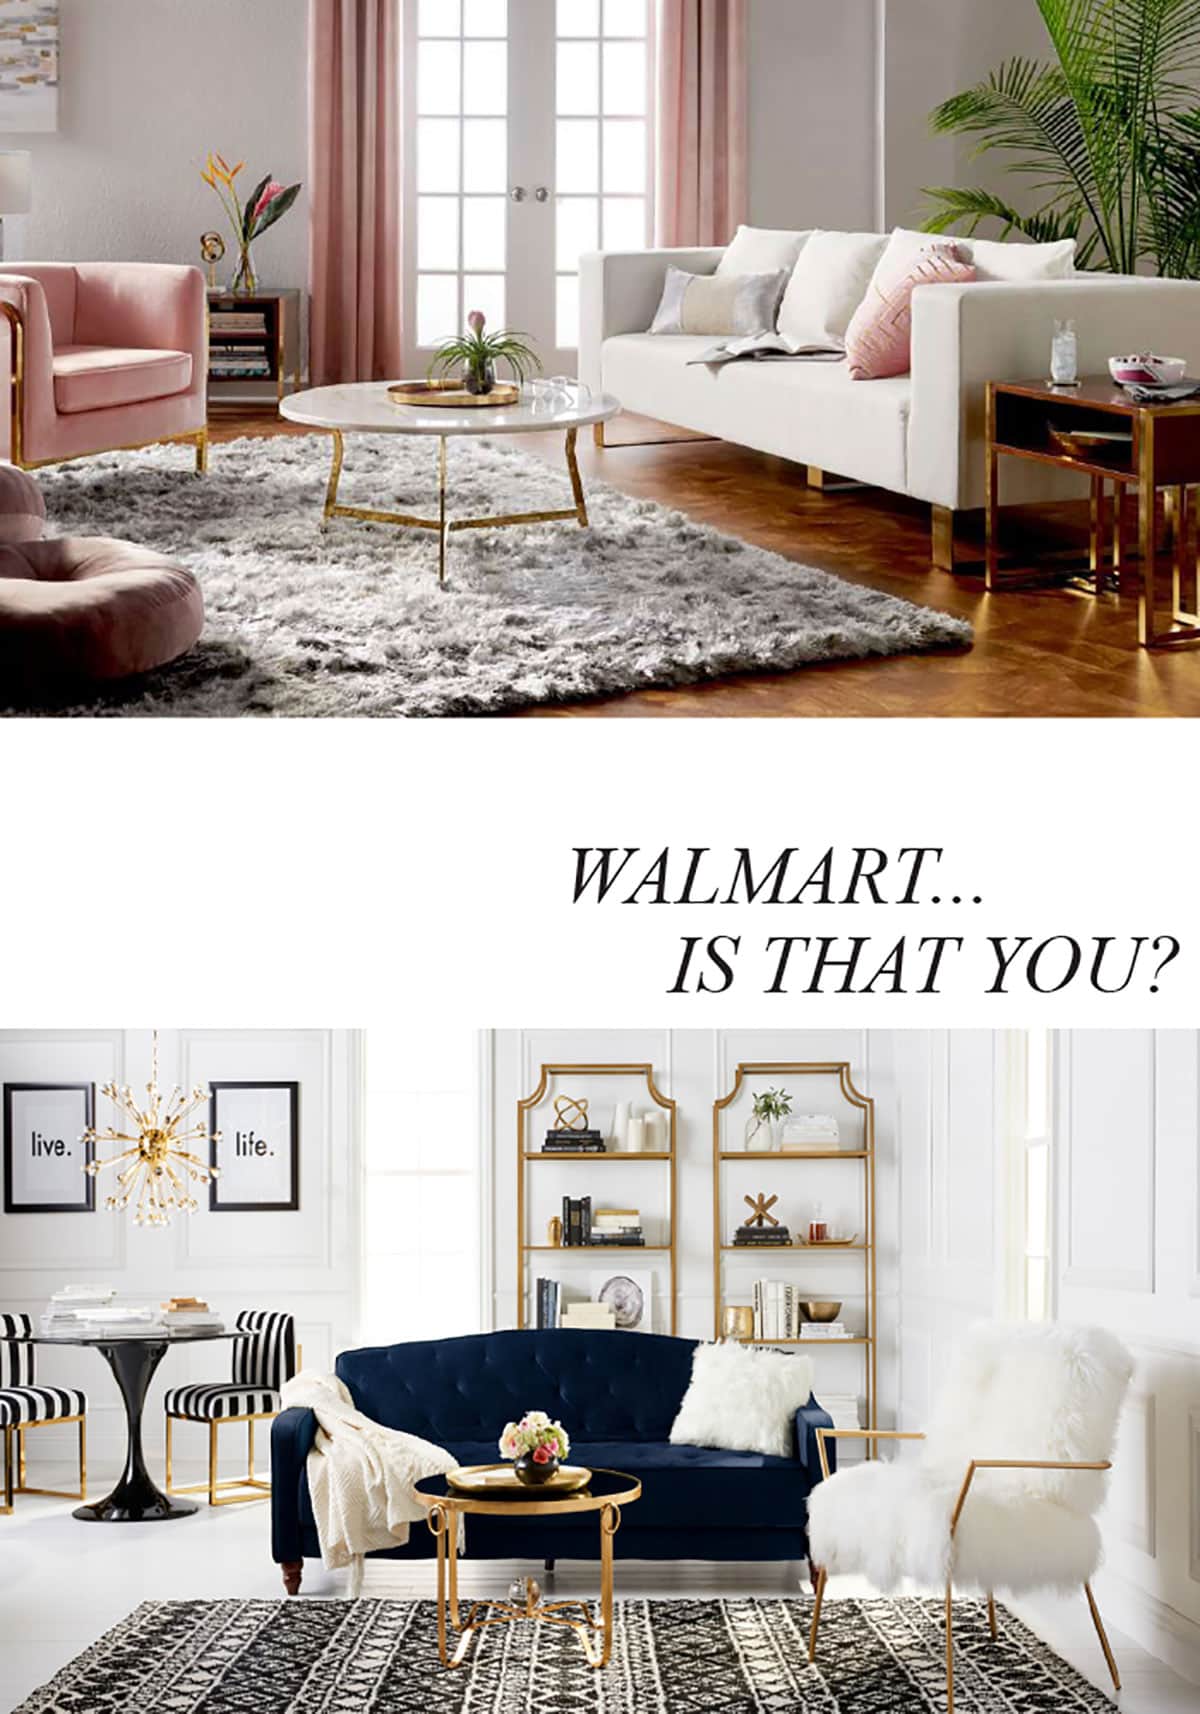 Top home decor and furniture picks from Walmart by an interior designer.